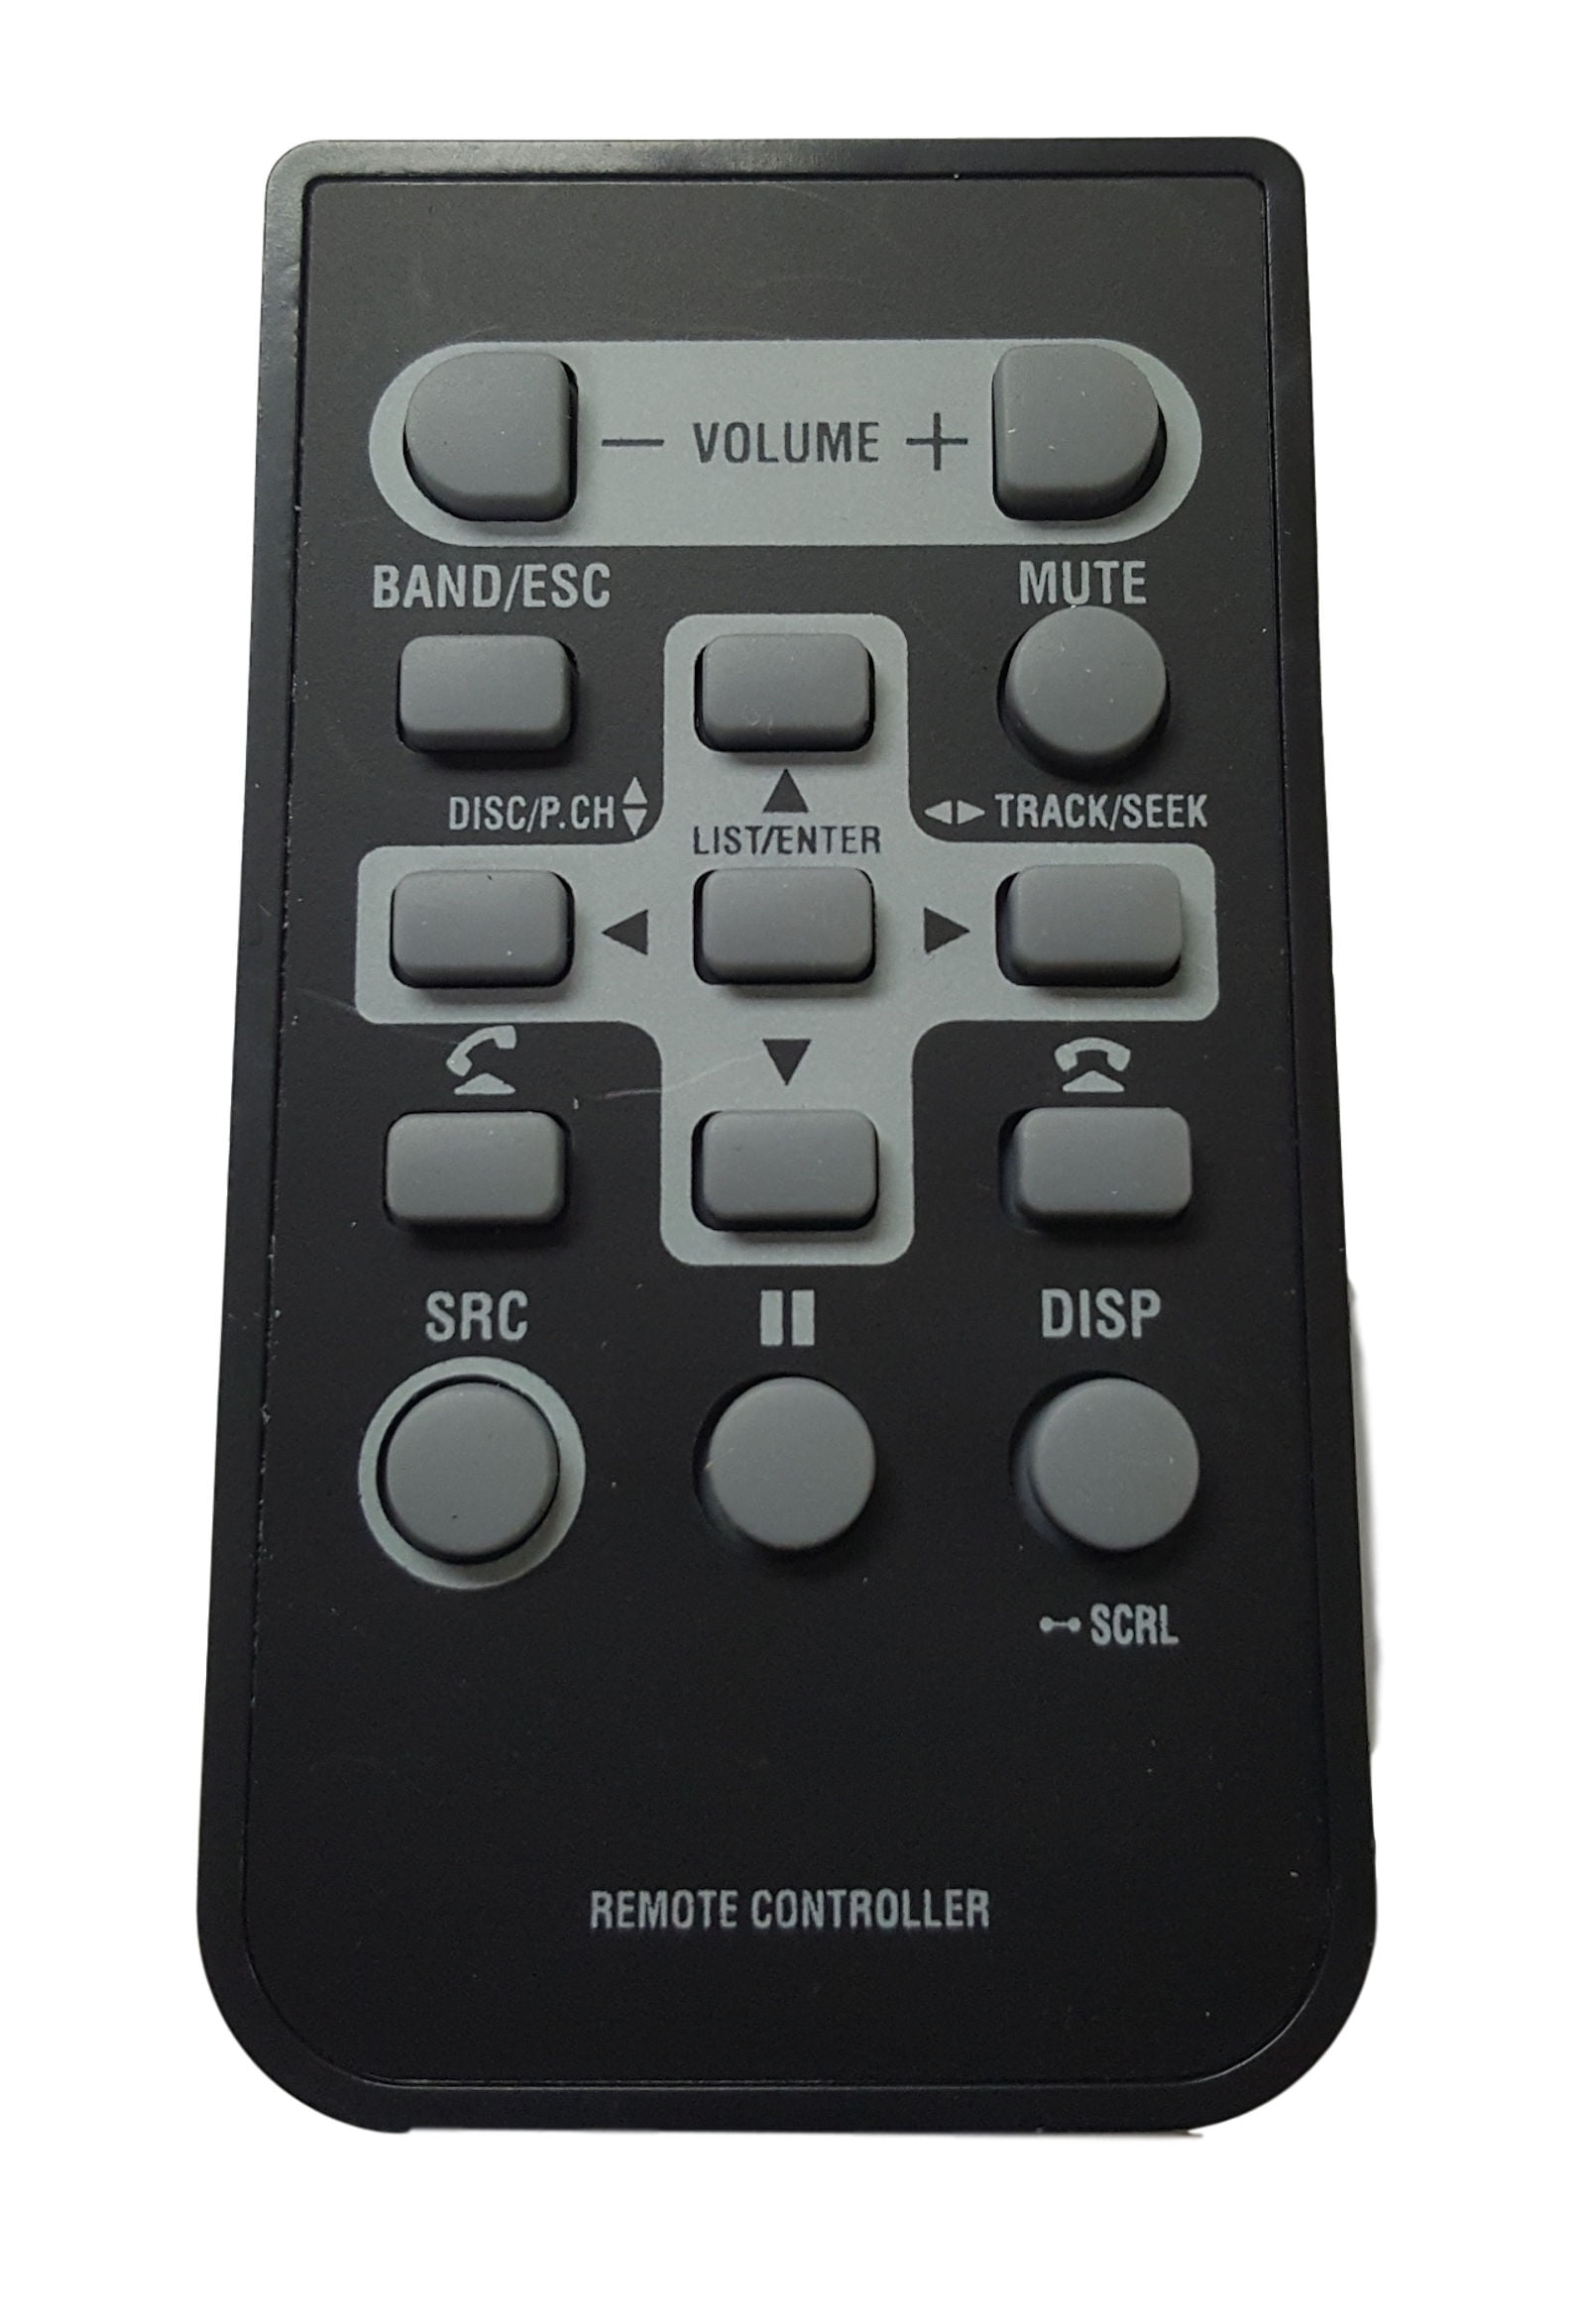 NEW CAR STEREO REMOTE CONTROL for PIONEER DEH-X4600BT Player 